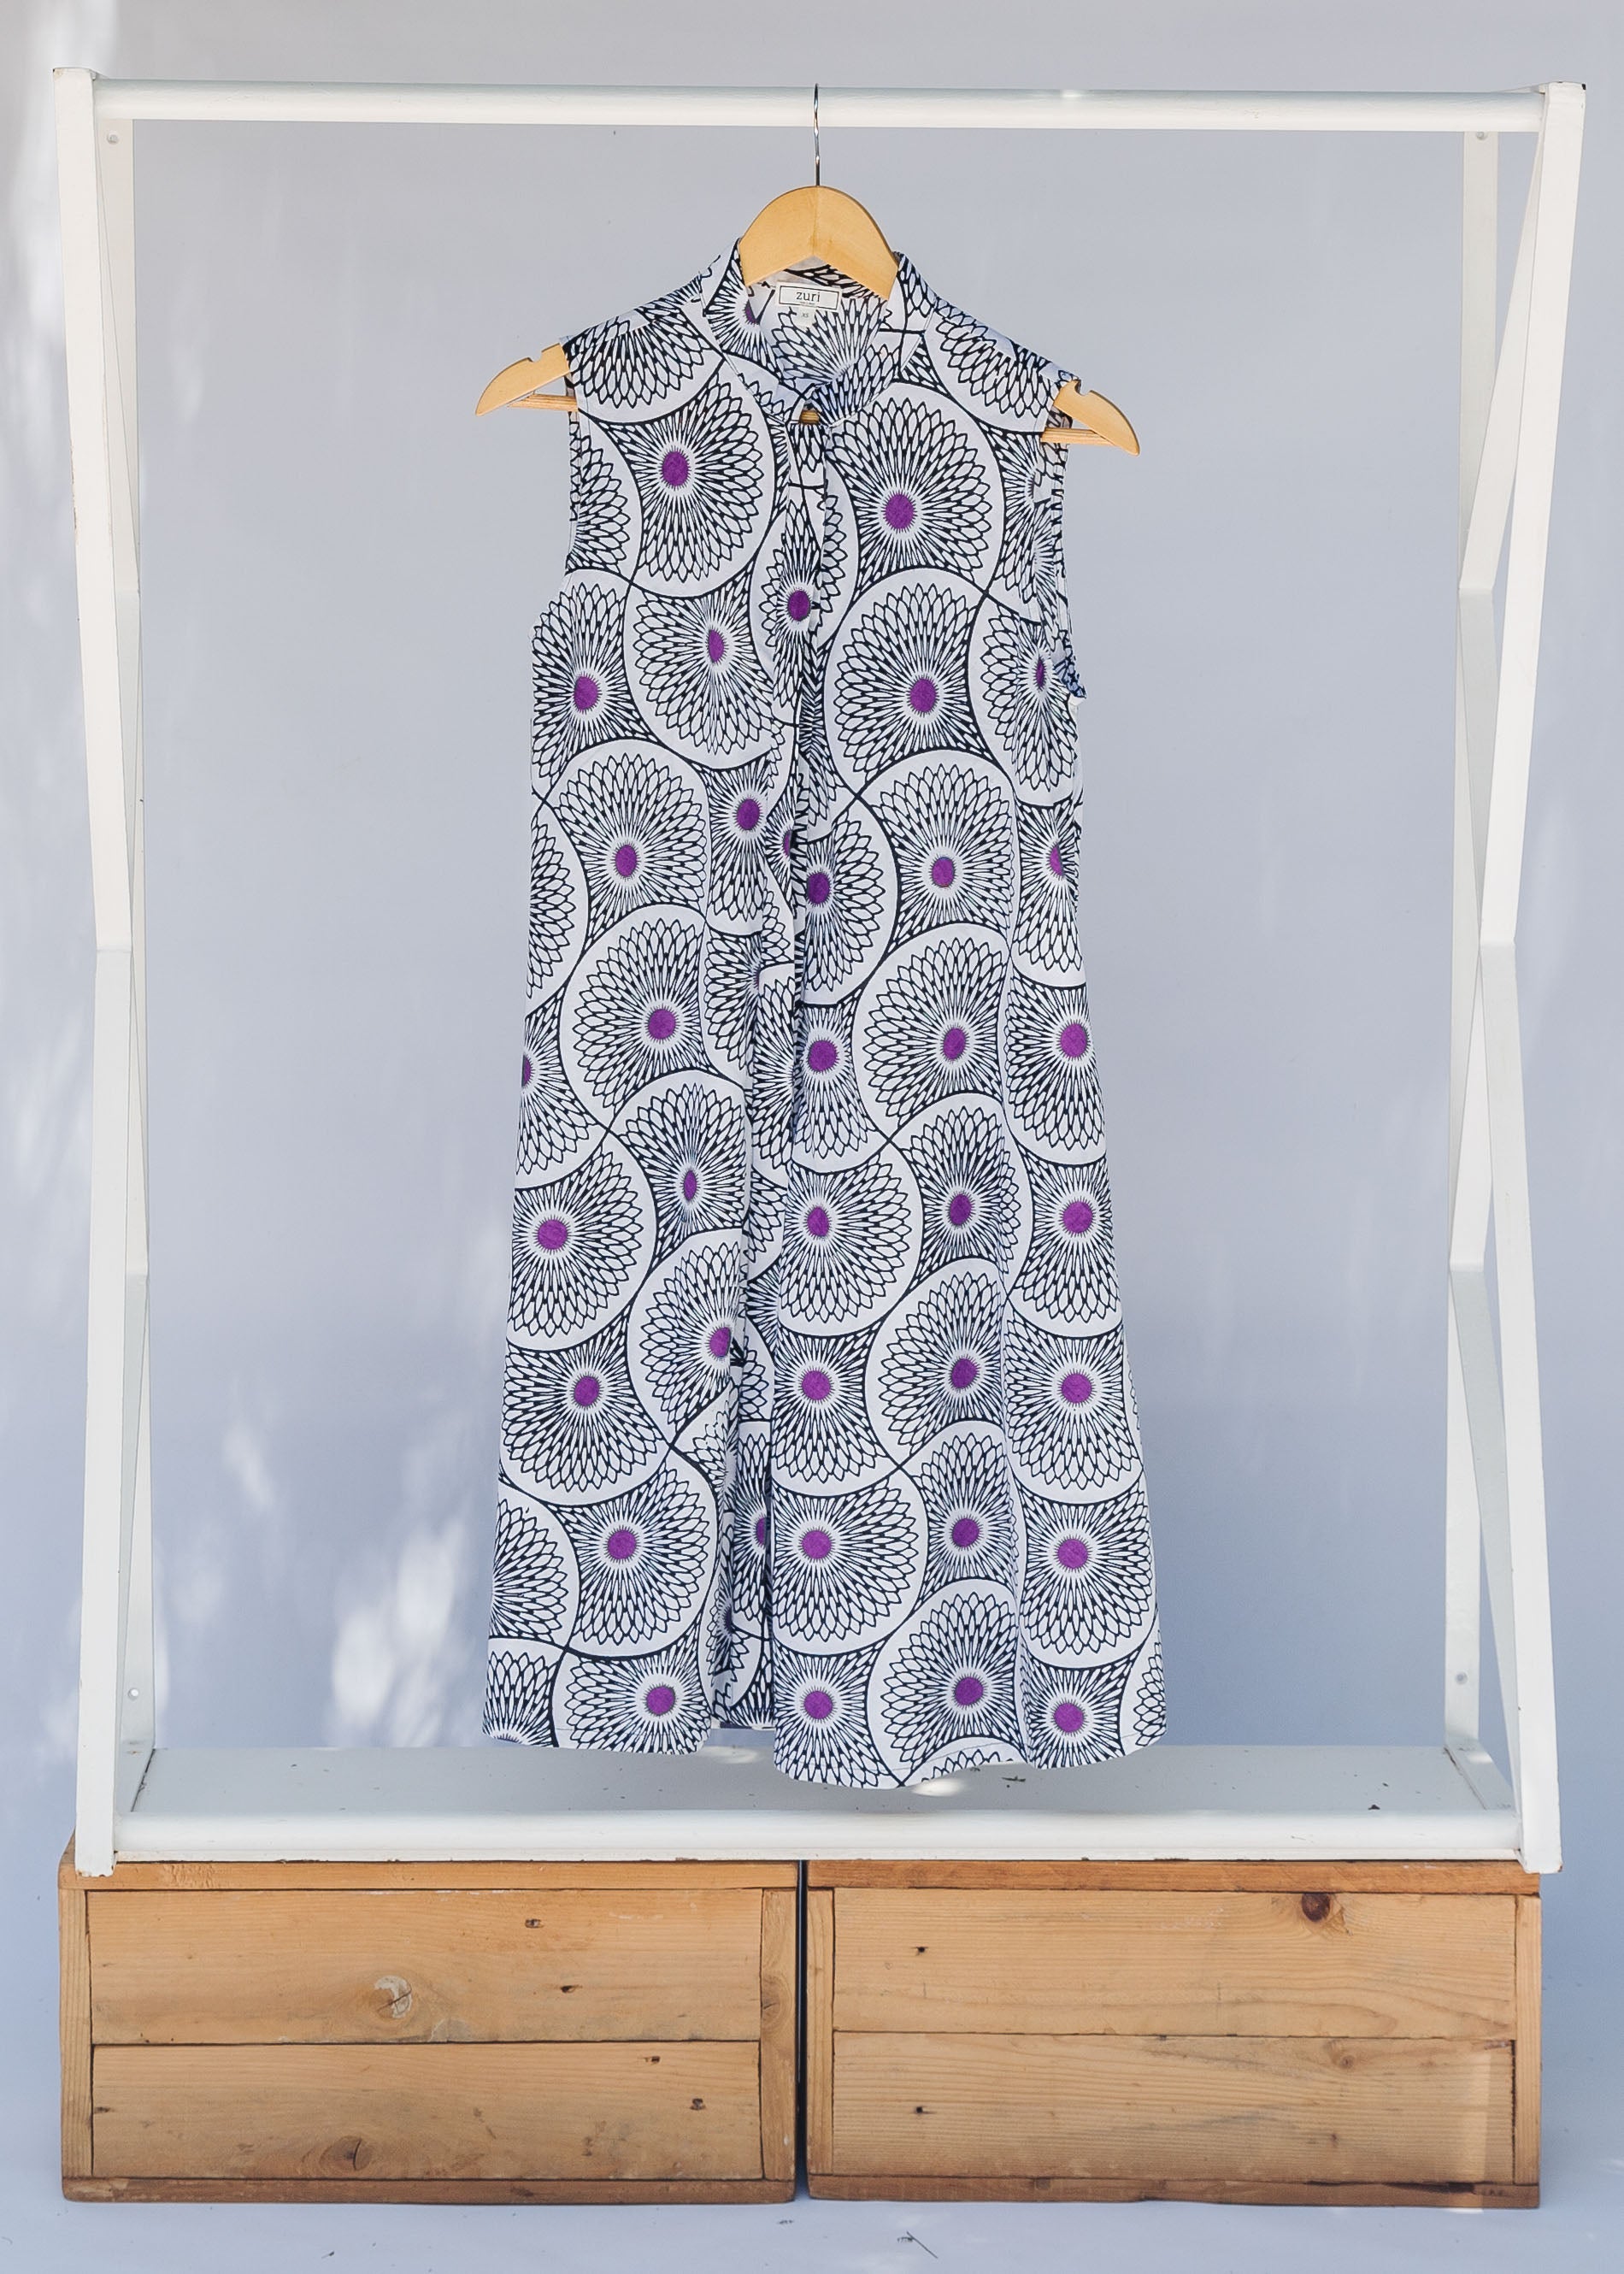 Display of white sleeveless dress with large black and purple floral print.